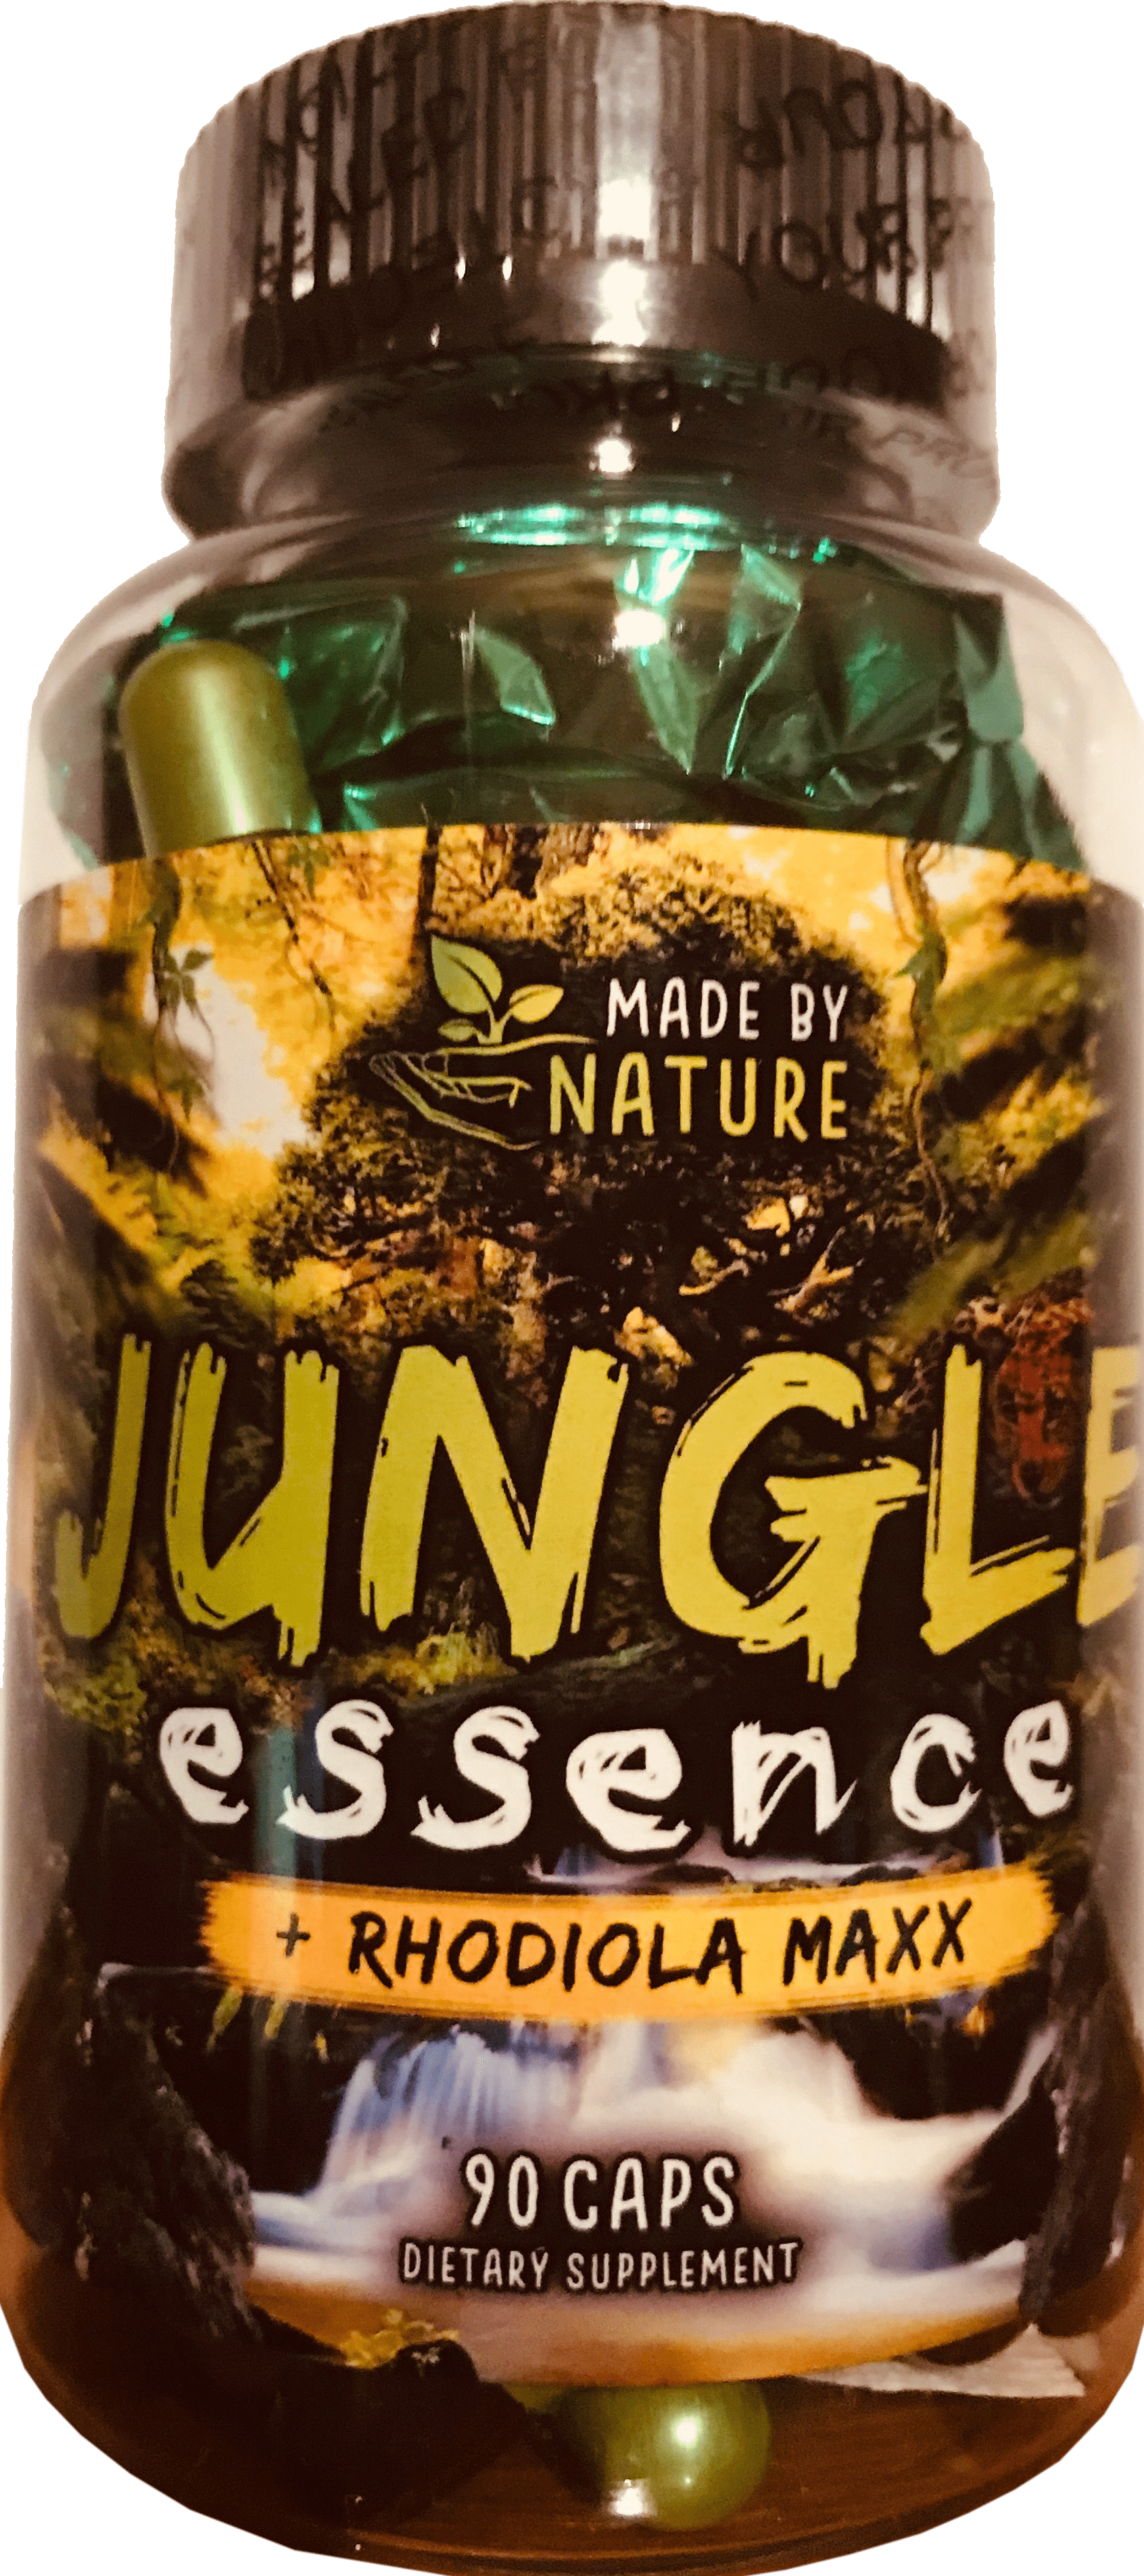 MADE BY NATURE Jungle Essence + Rhodiola Maxx 90 шт. / 13 servings,  ml, Made By Nature. Nootropic. 